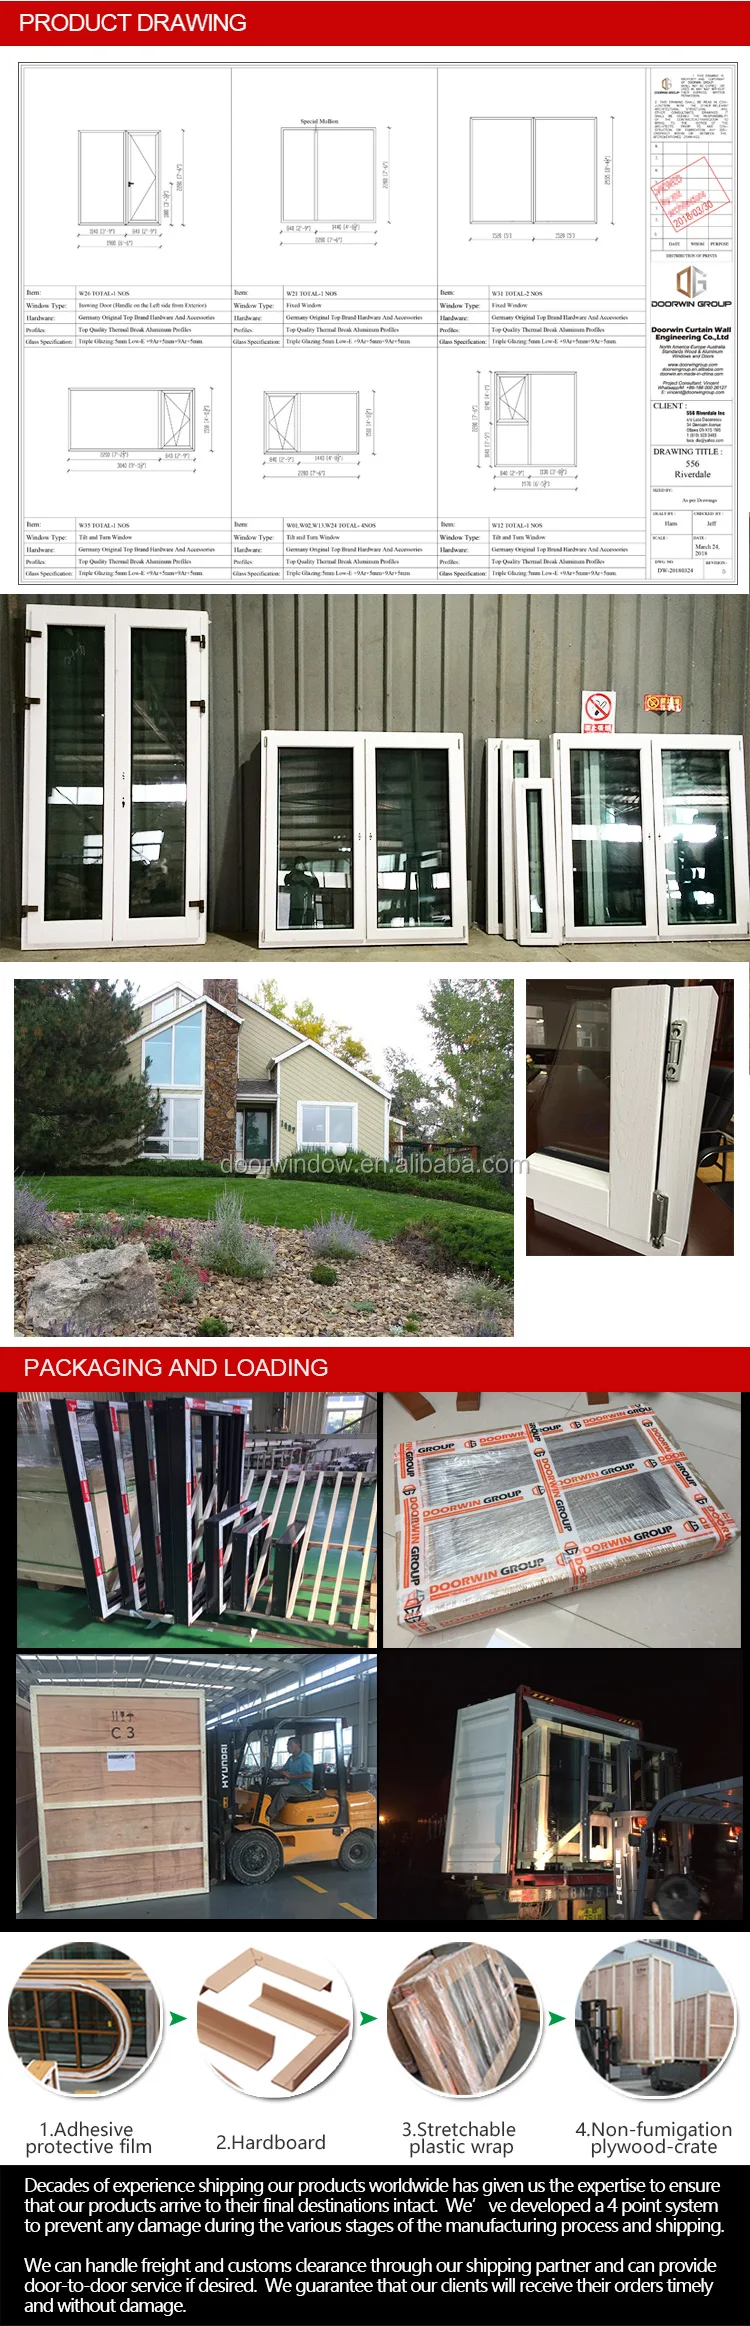 Solid Wood frame Window With Exterior Aluminum Cladding French Window